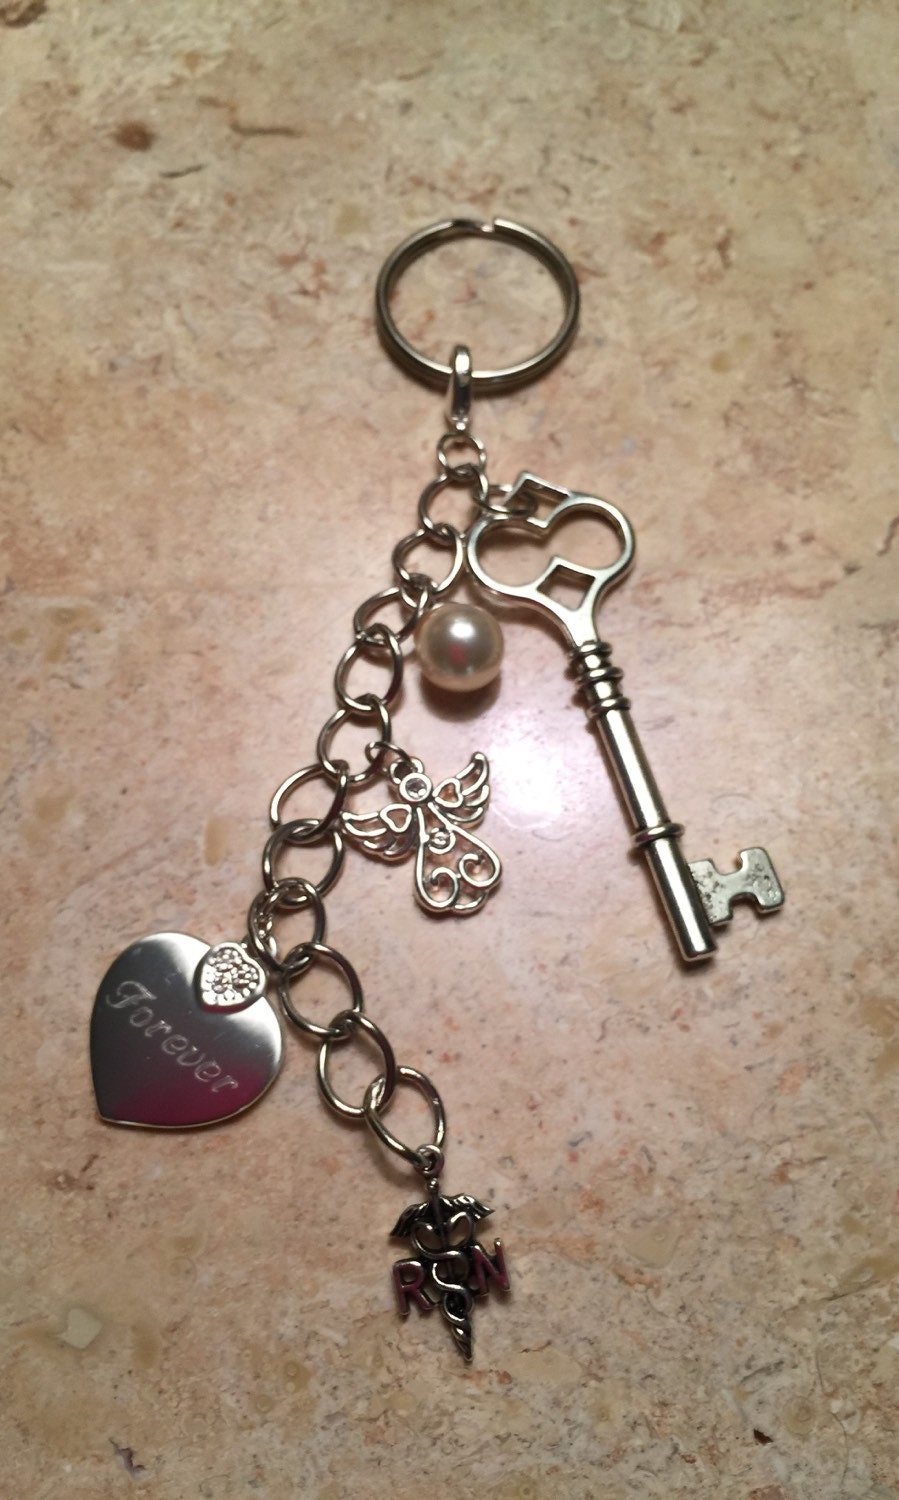 Forever Loved RN Keychain by DazzlingsDesigns on Etsy